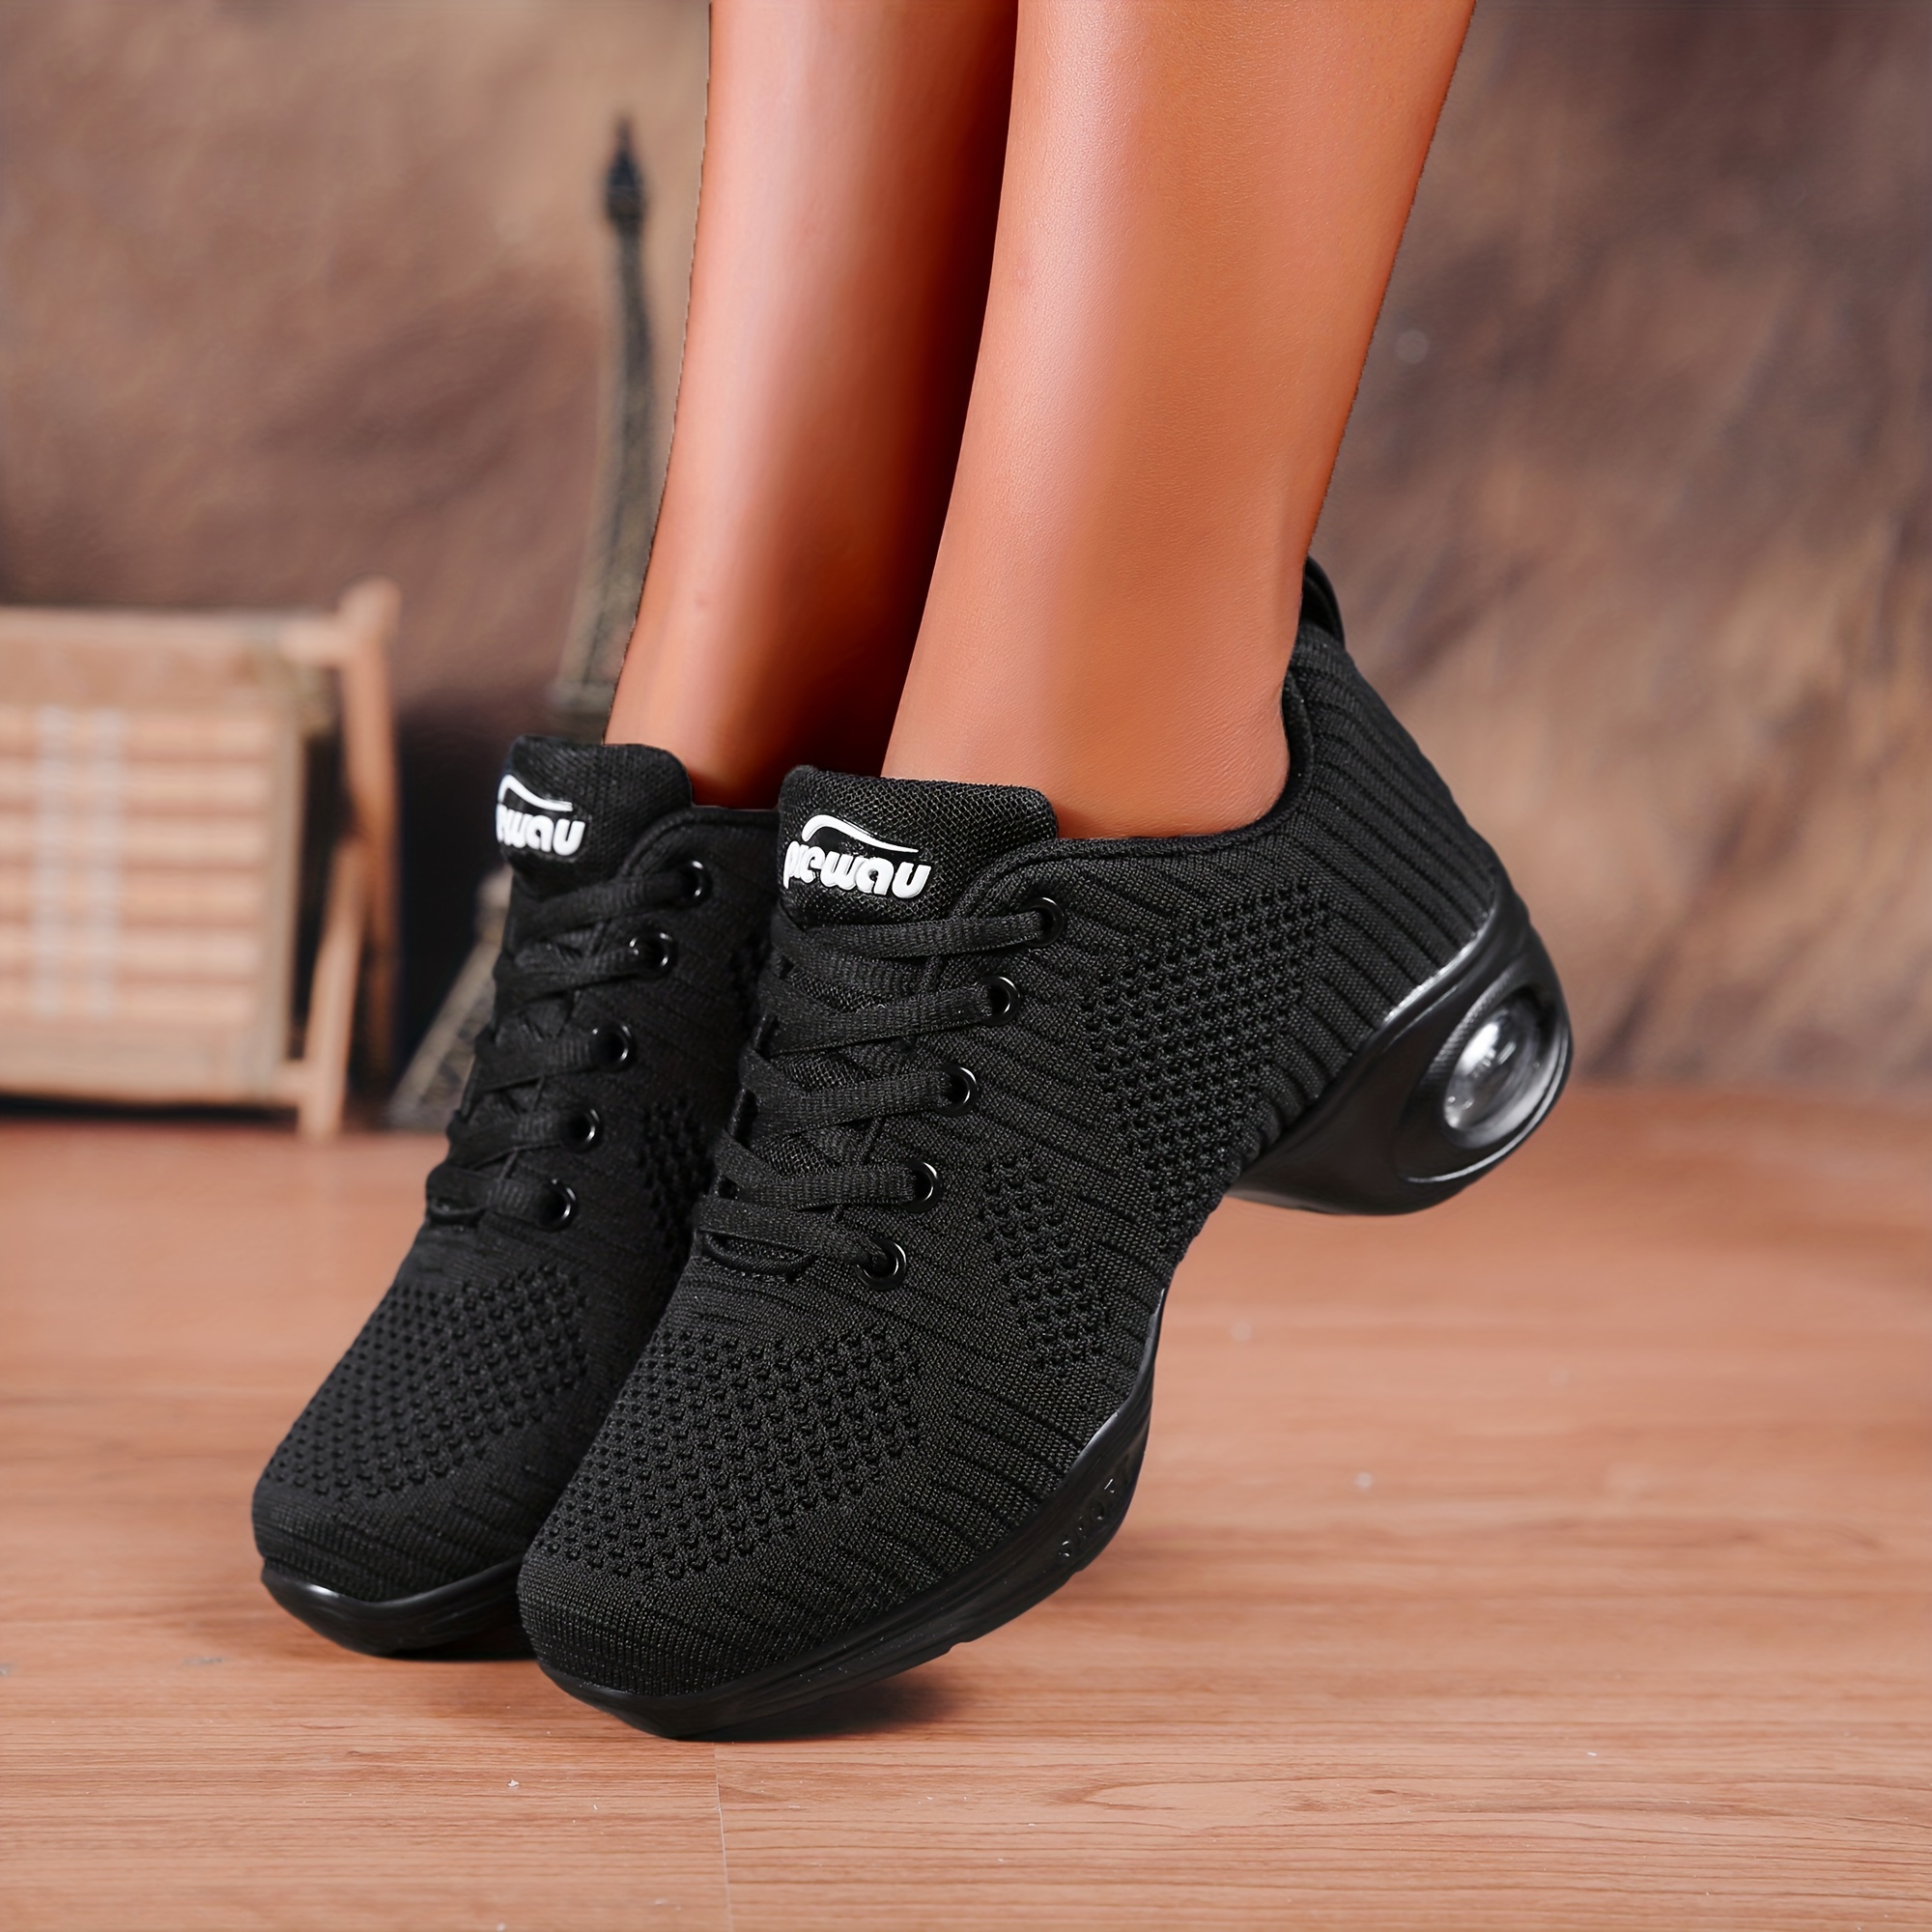 Women's Jazz Shoes Lace-up Dance Sneakers